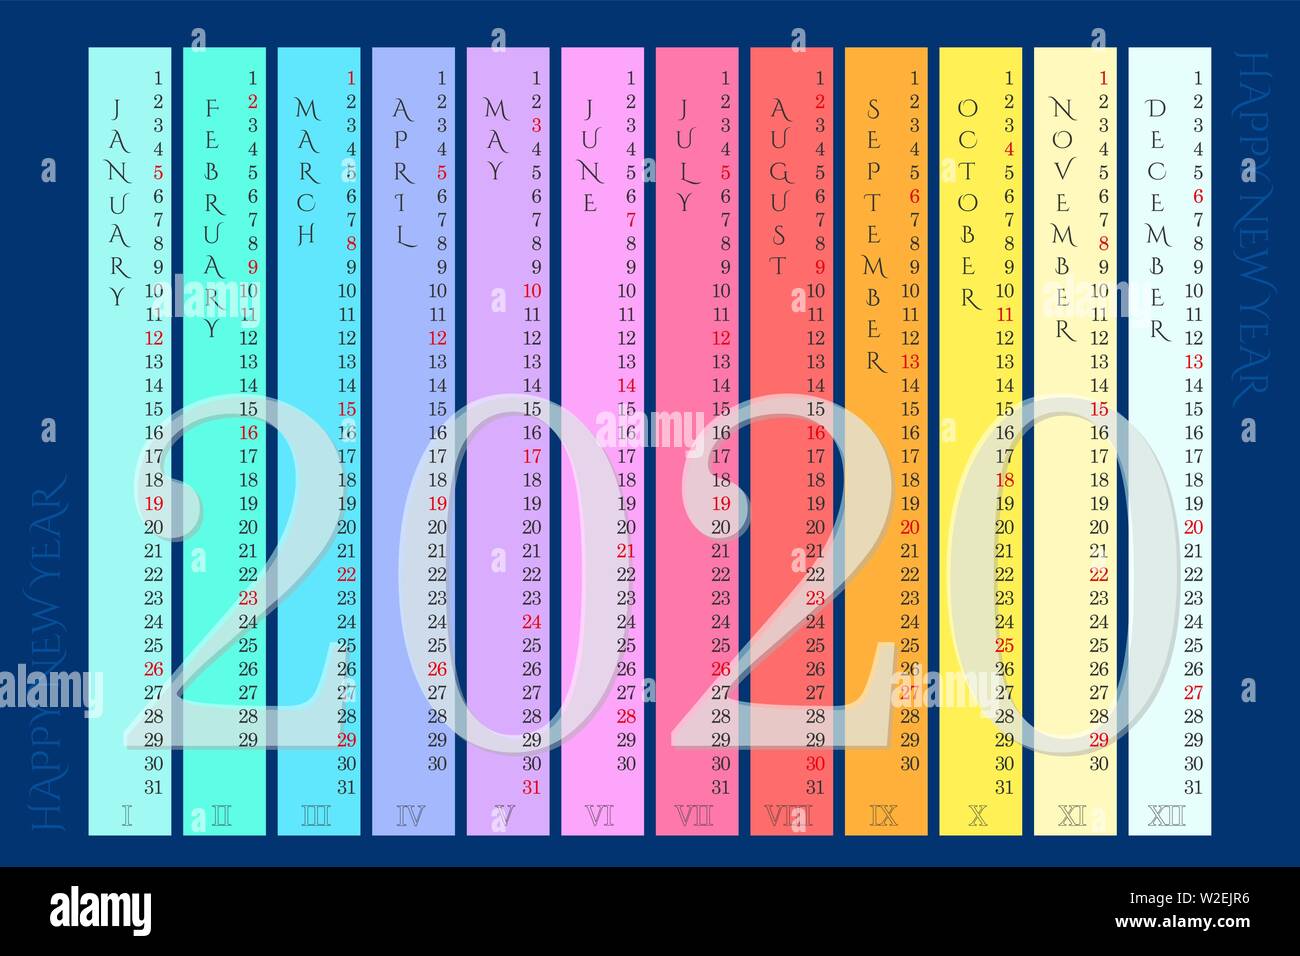 Vector rainbow wall calendar 2020 with vertical months on navy blue background Stock Vector